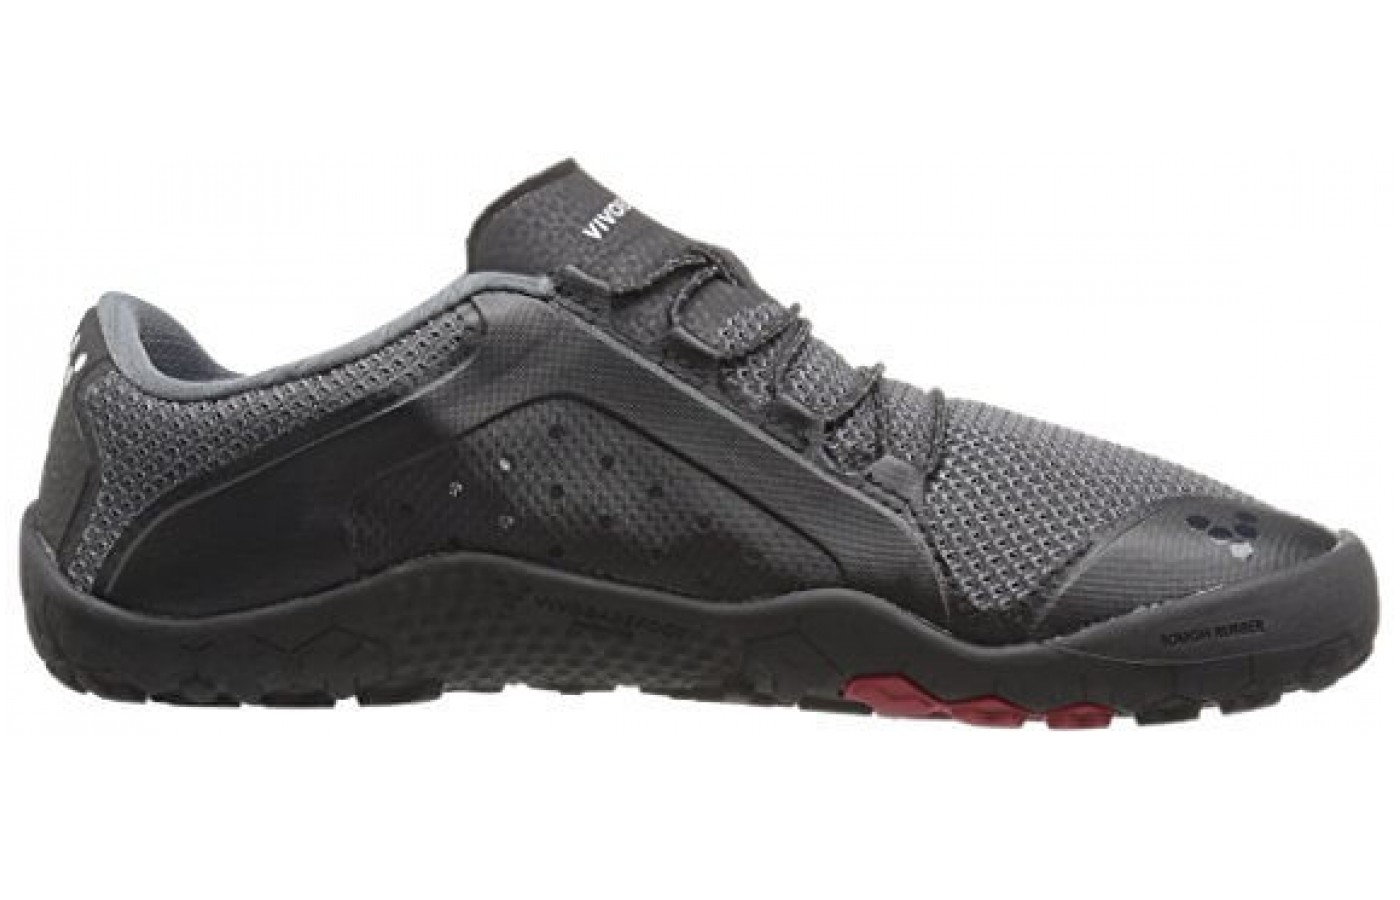 The Vivobarefoot Primus Trail FG has a mountain lace with toggle 